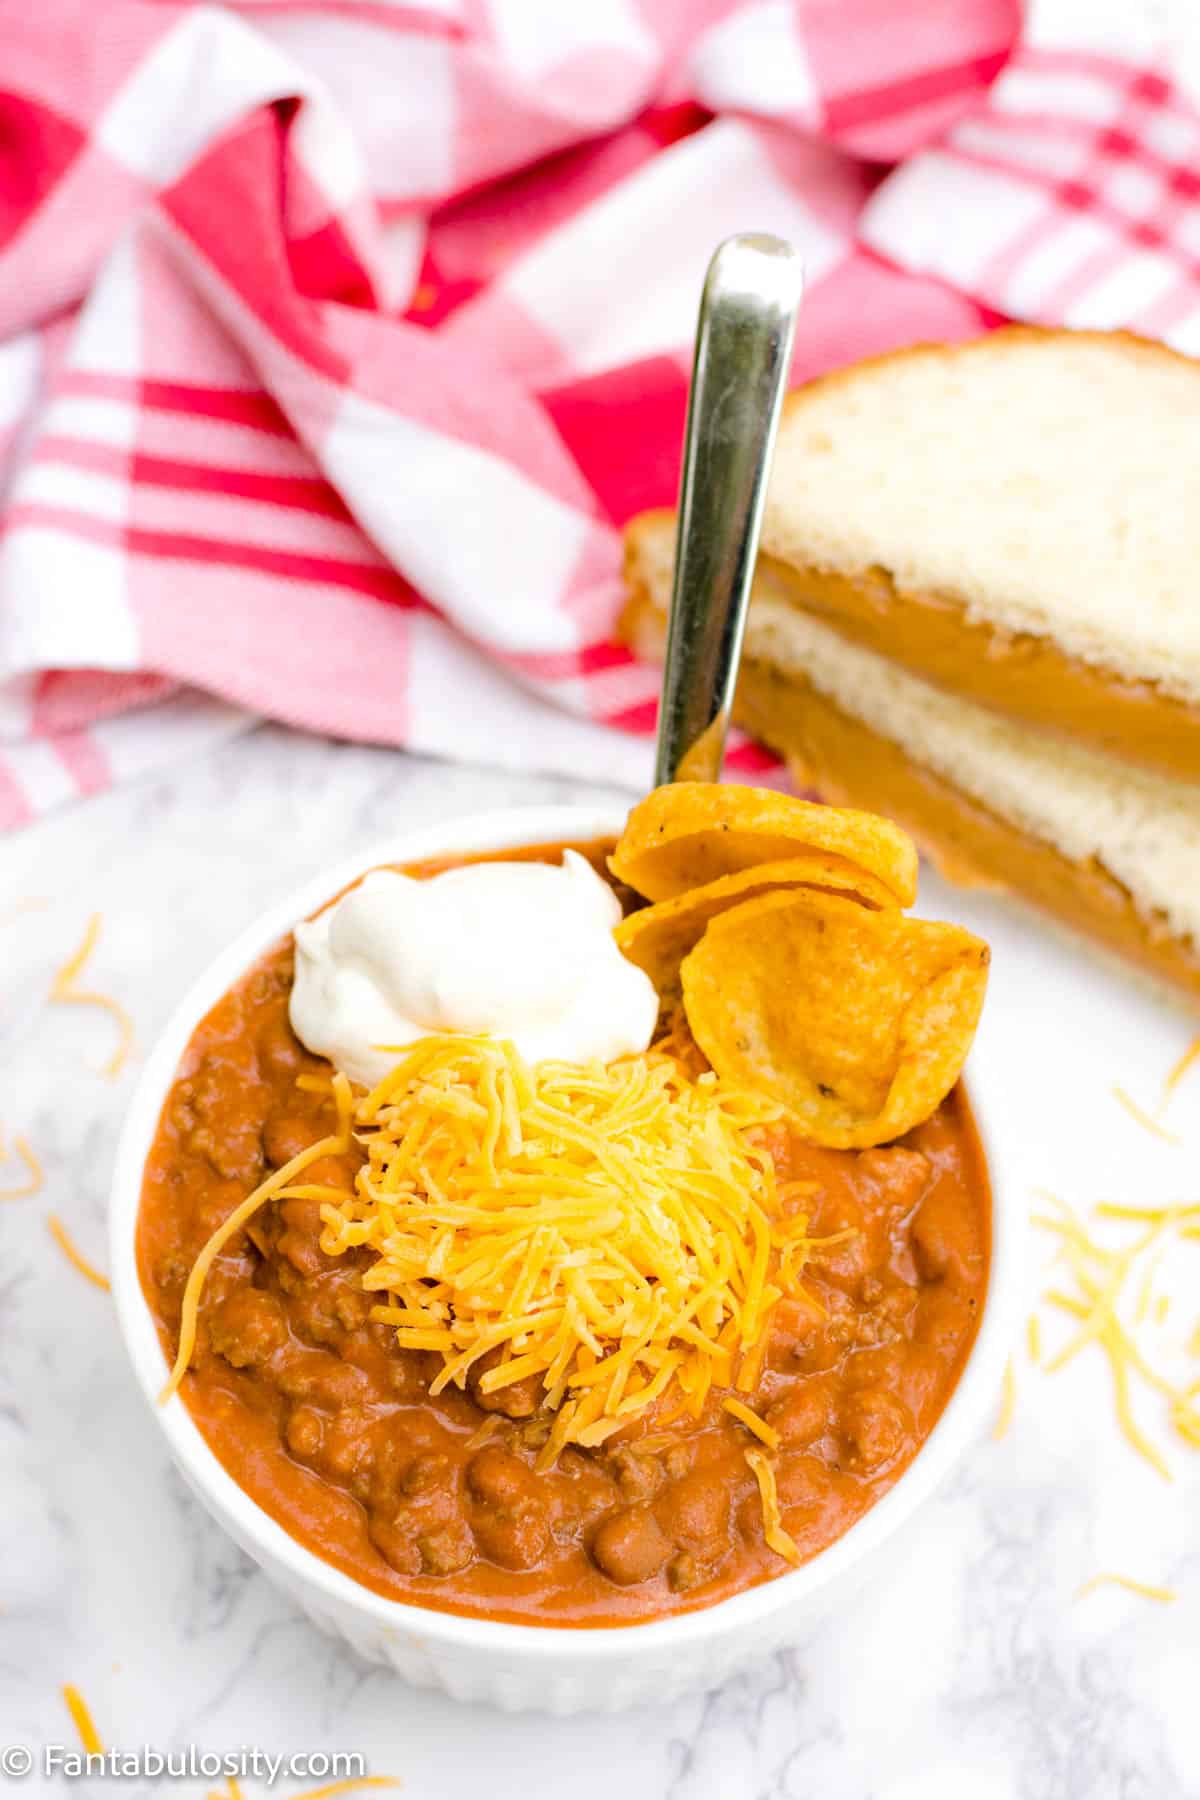 Chili with cheese, sour cream and fritos